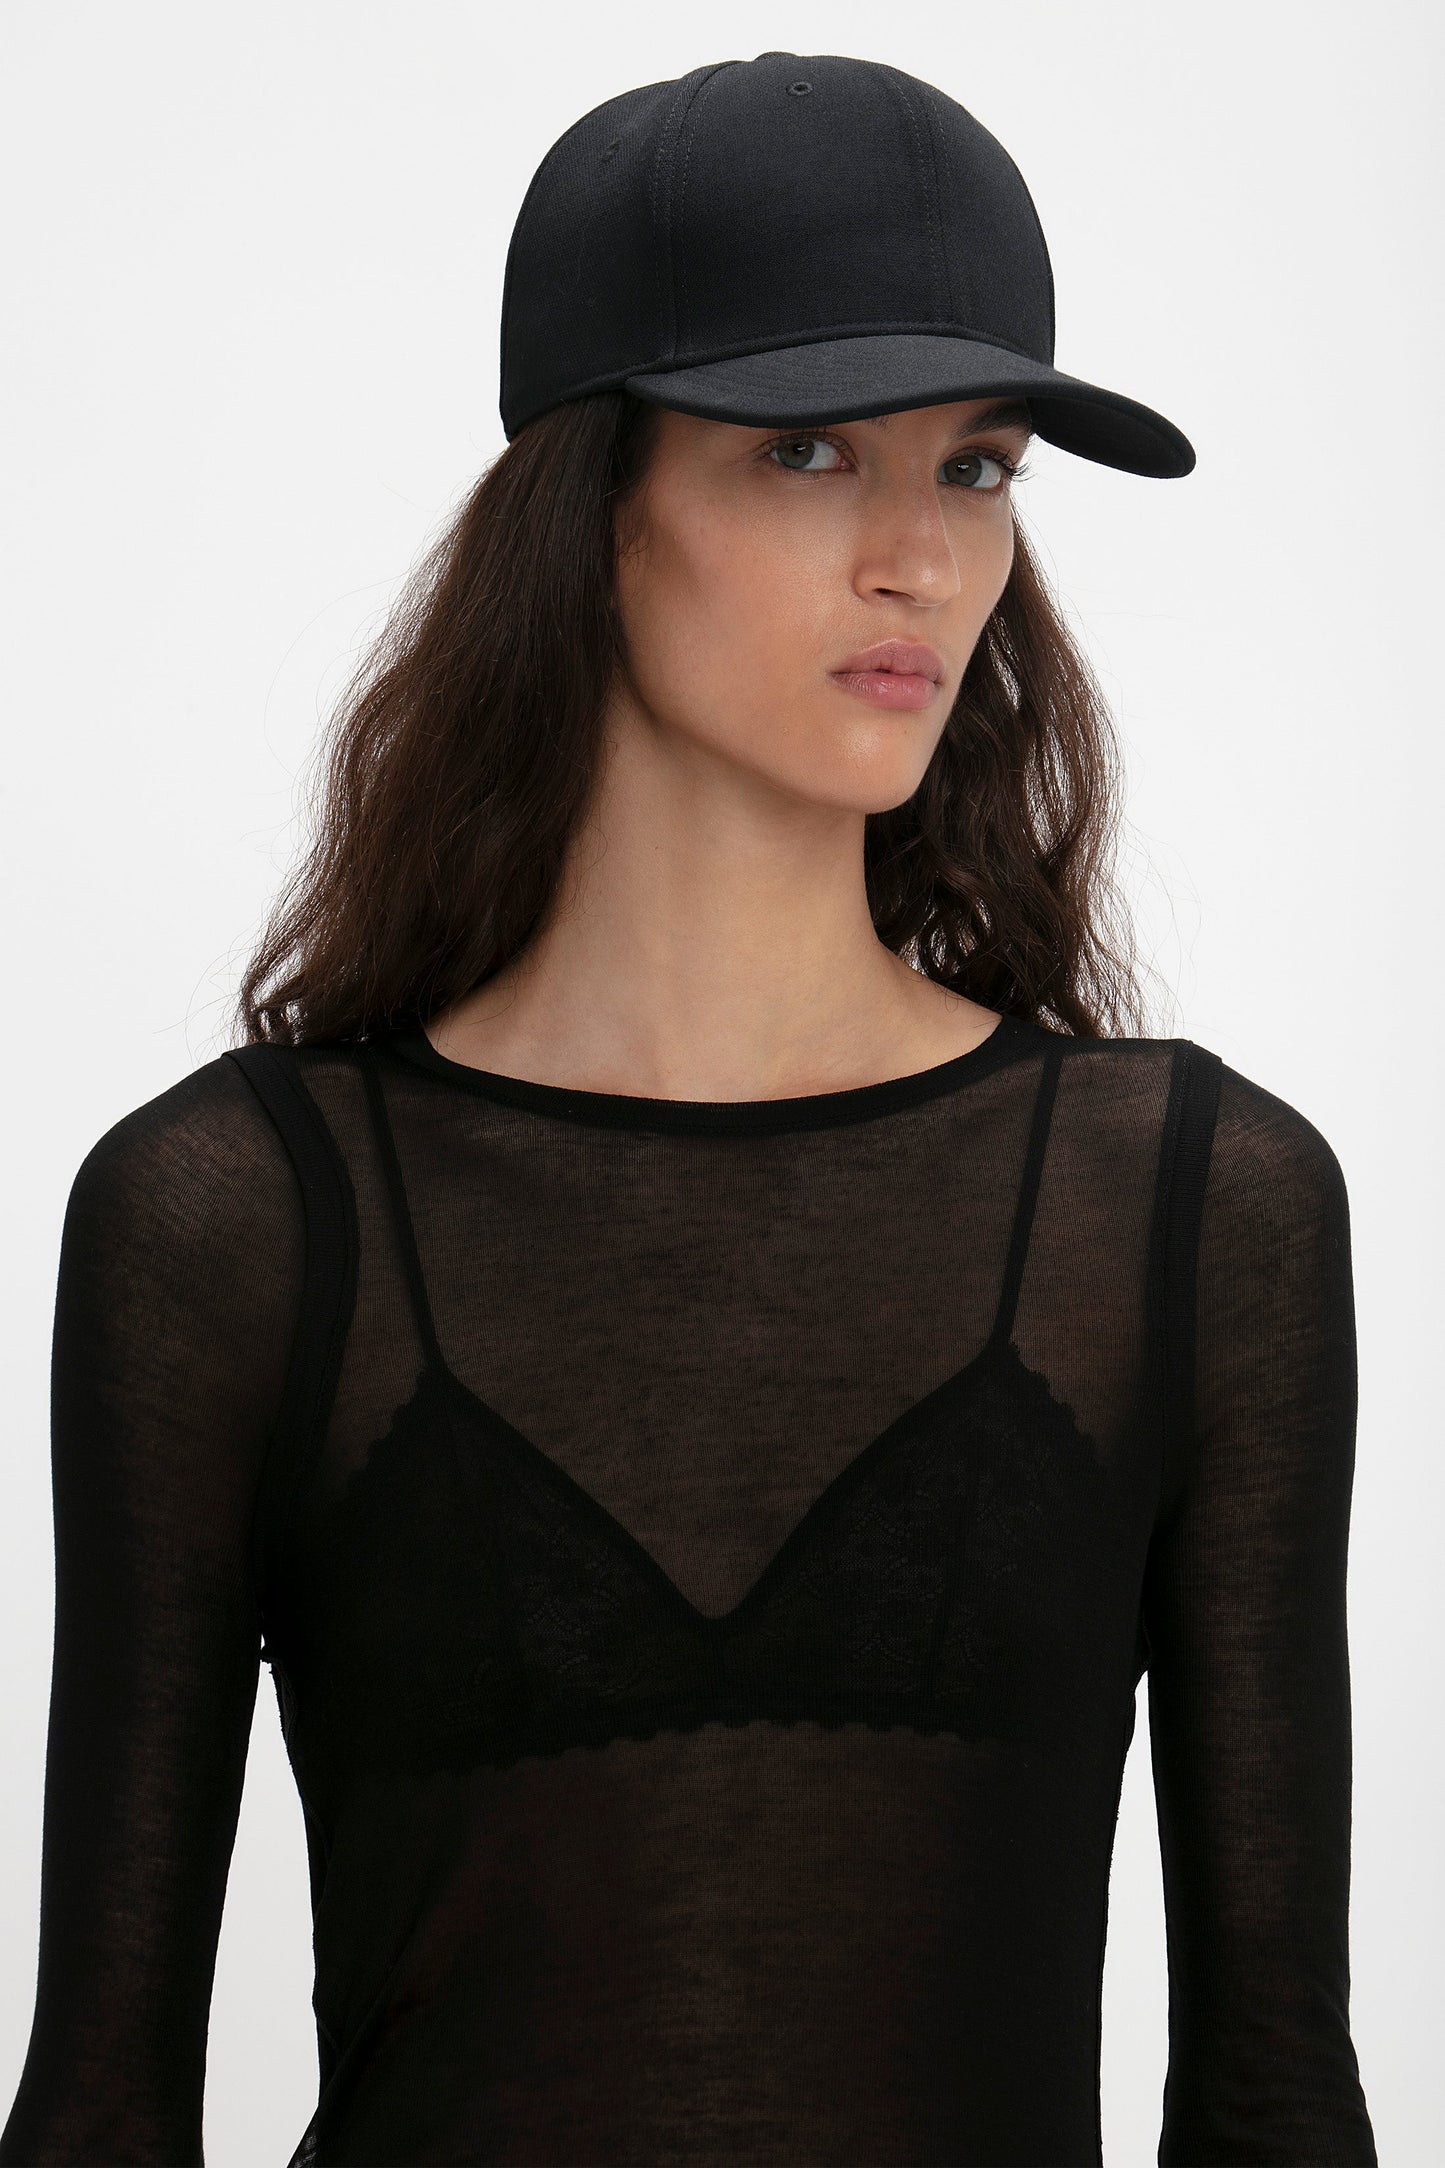 A woman wearing a Victoria Beckham Exclusive Logo Cap In Black and a sheer black top with lace detailing, looking toward the camera.